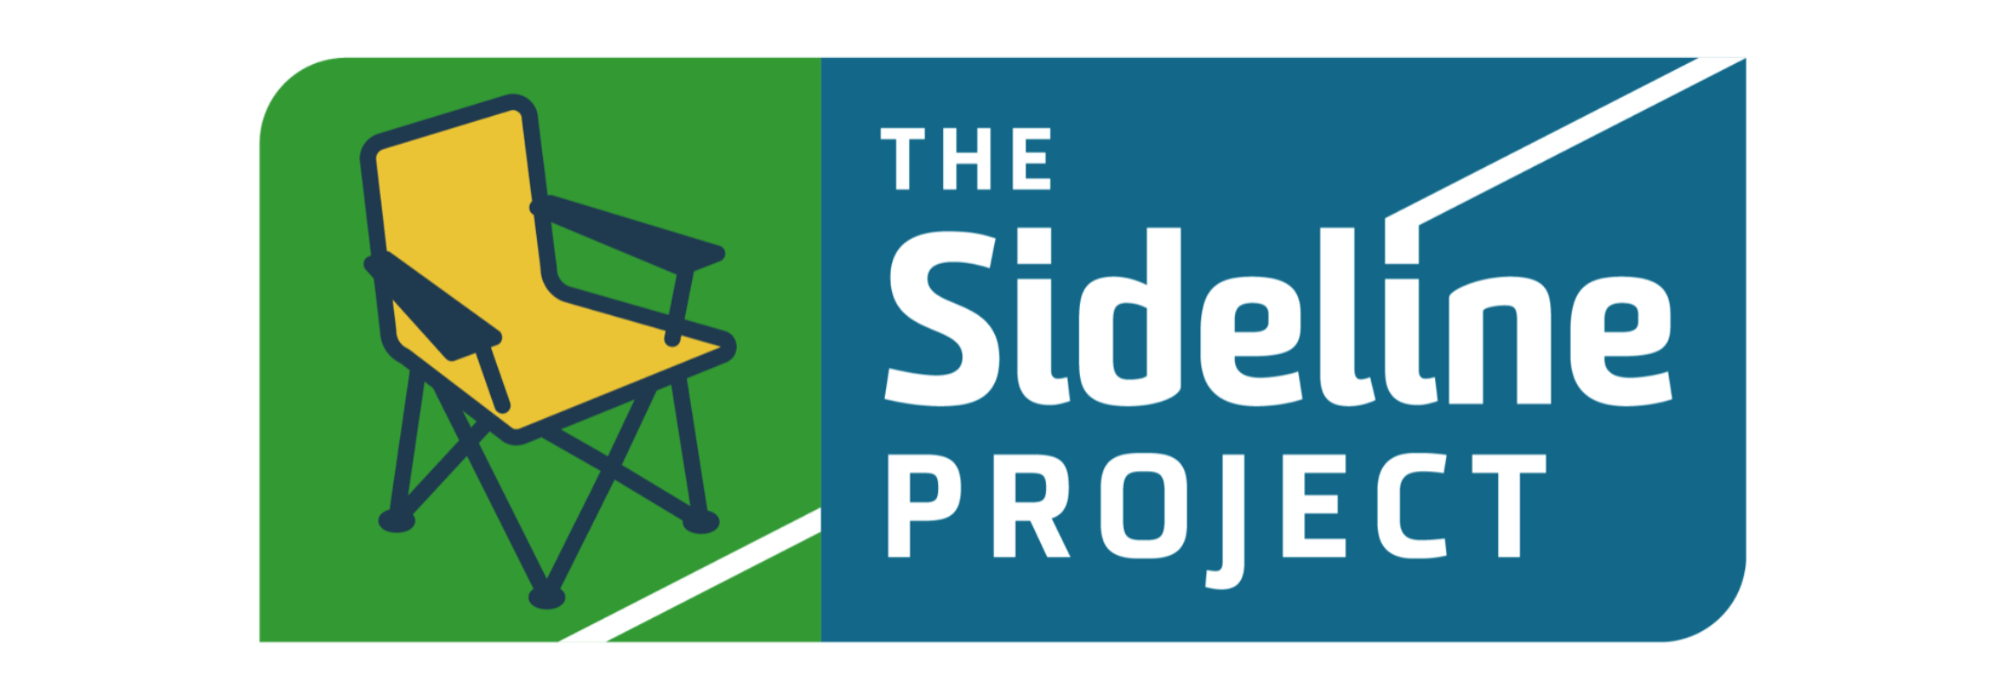 Sideline Project